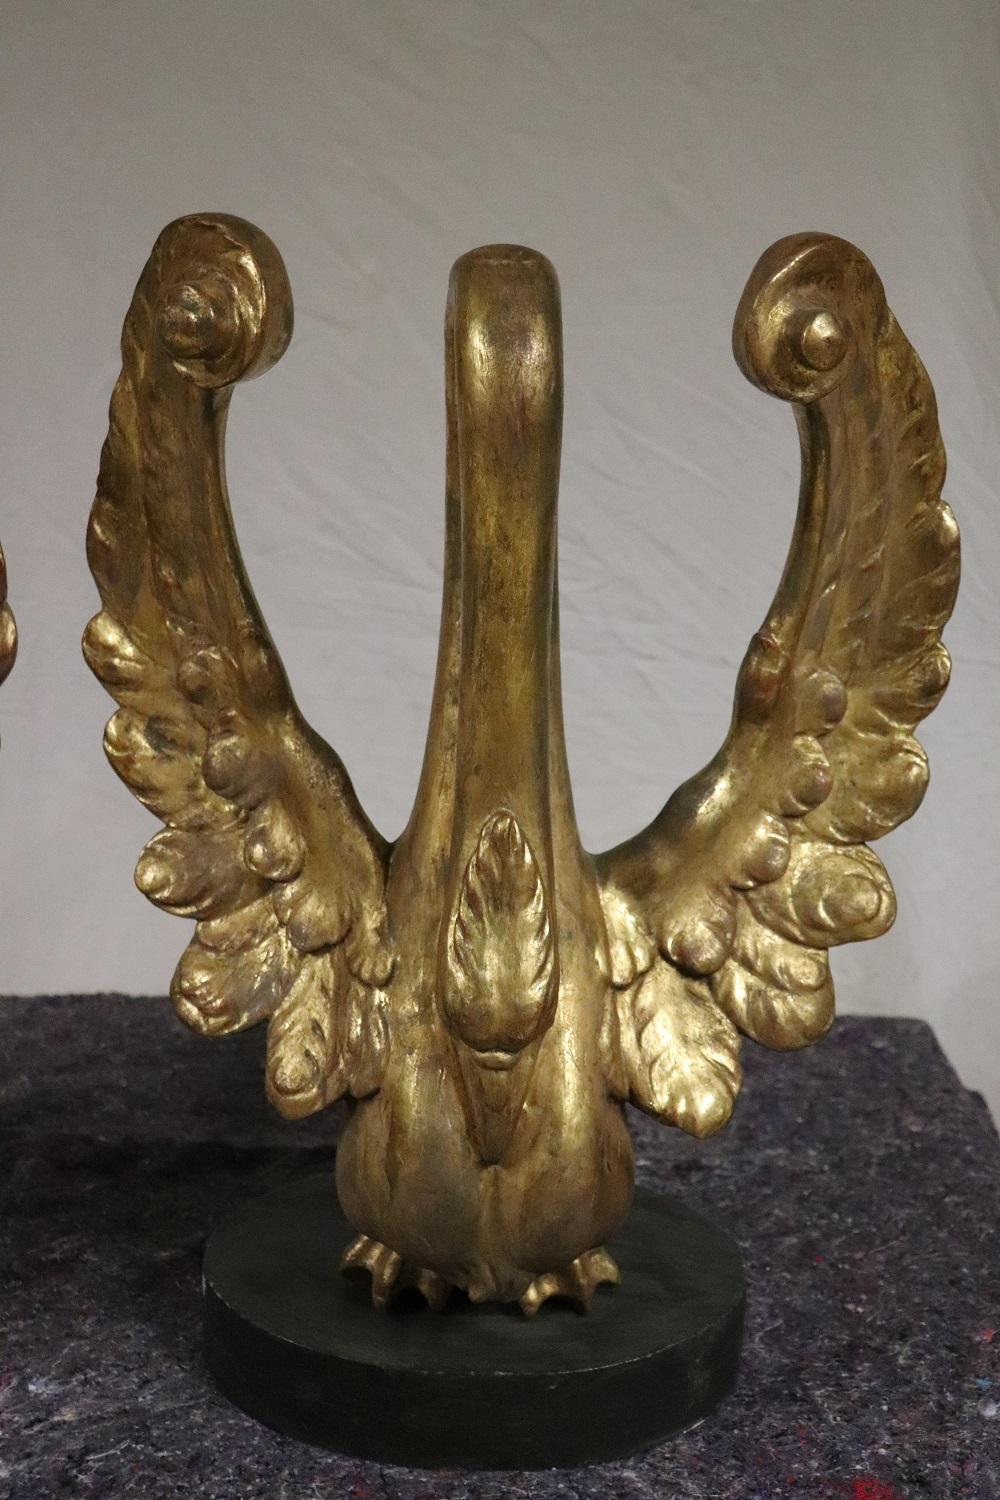 Gilt 19th Century Antique Pair of Swan Sculpture in Carved and Gilded Wood